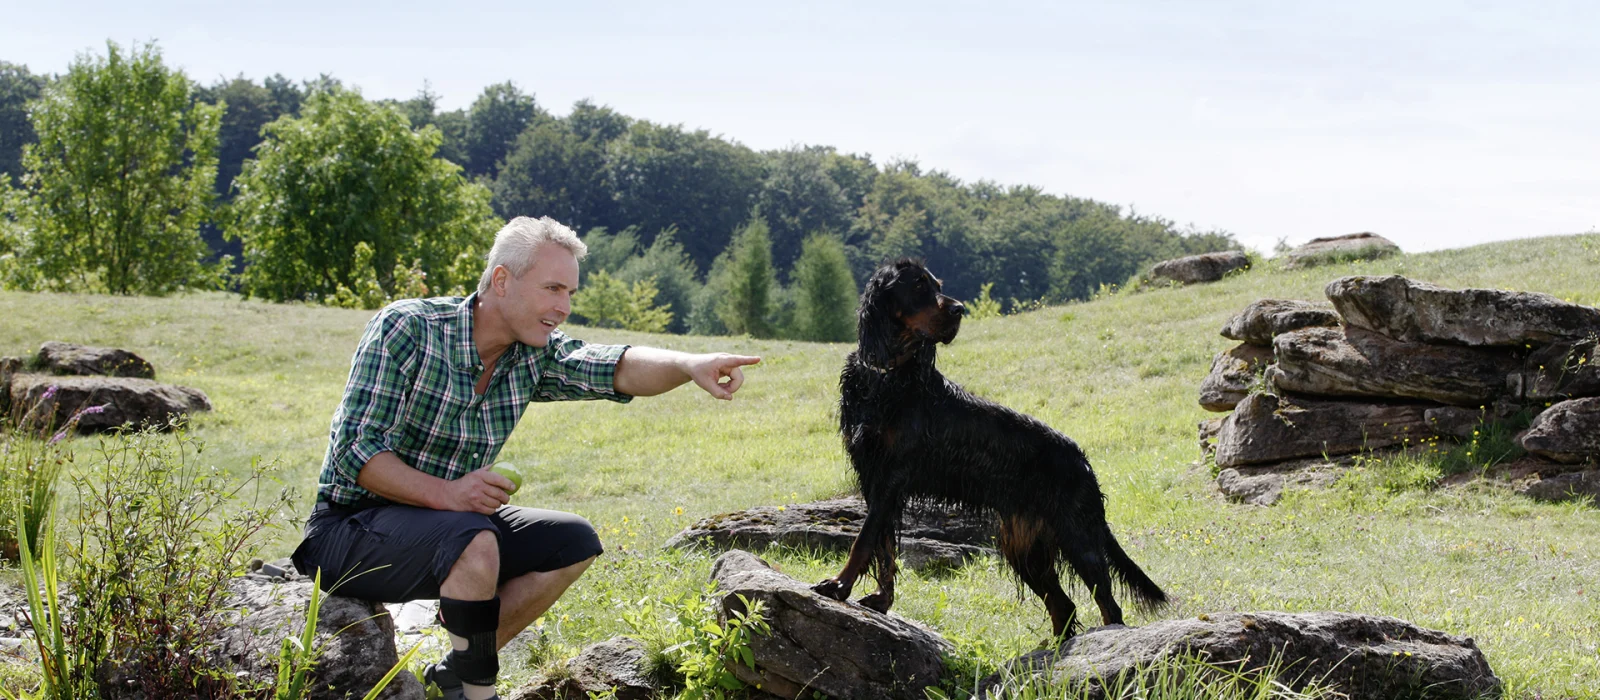 A man sitting on a rock outdoors directs his dog's attention as he points to something in the distance. The man is wearing an Ottobock brace on his ankle.